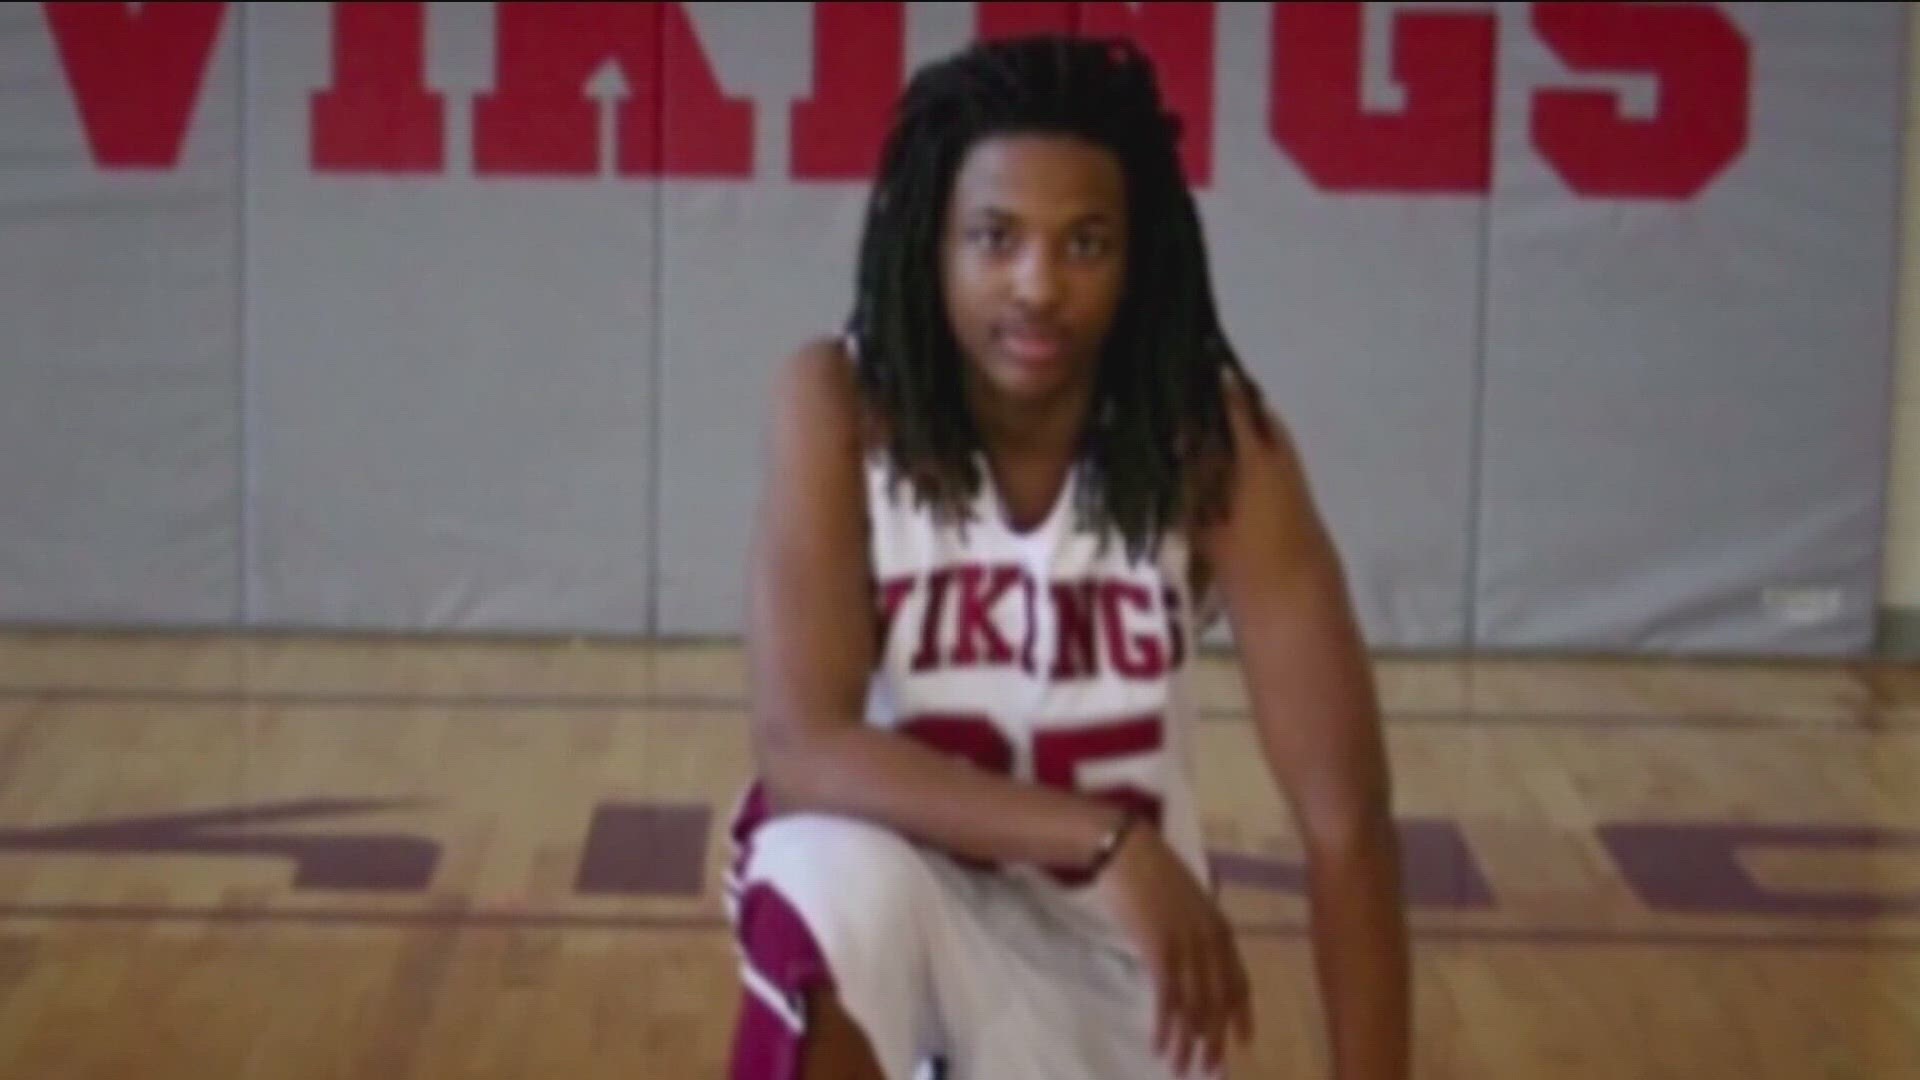 Officials originally said Kendrick Johnson intentionally crawled in the mat to get his shoe and suffocated – ruling his death accidental.